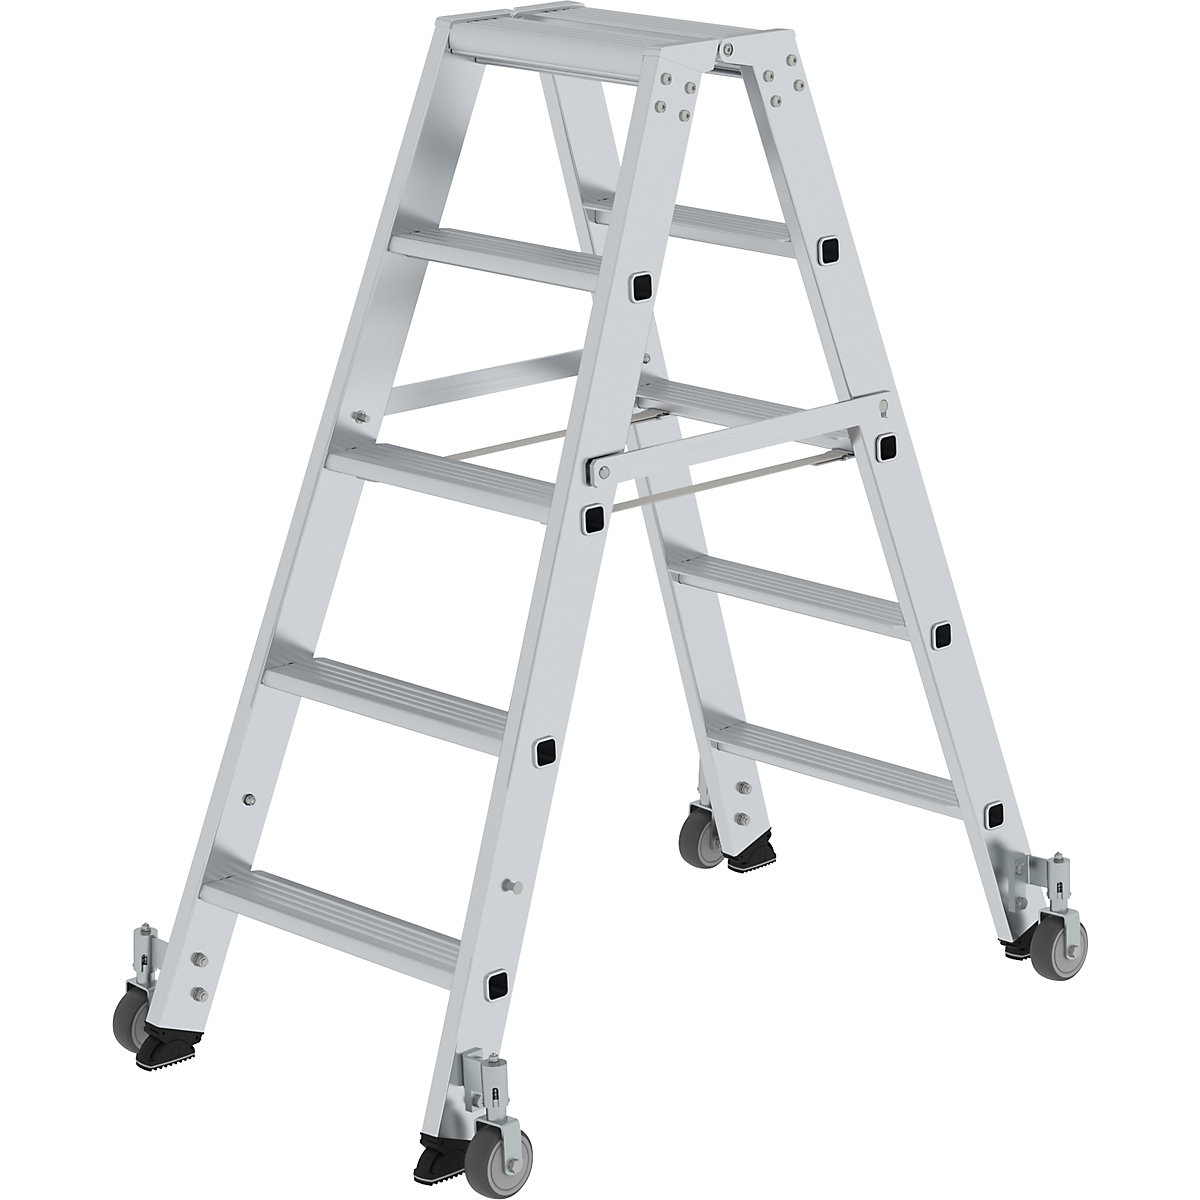 Step ladder, double sided - MUNK